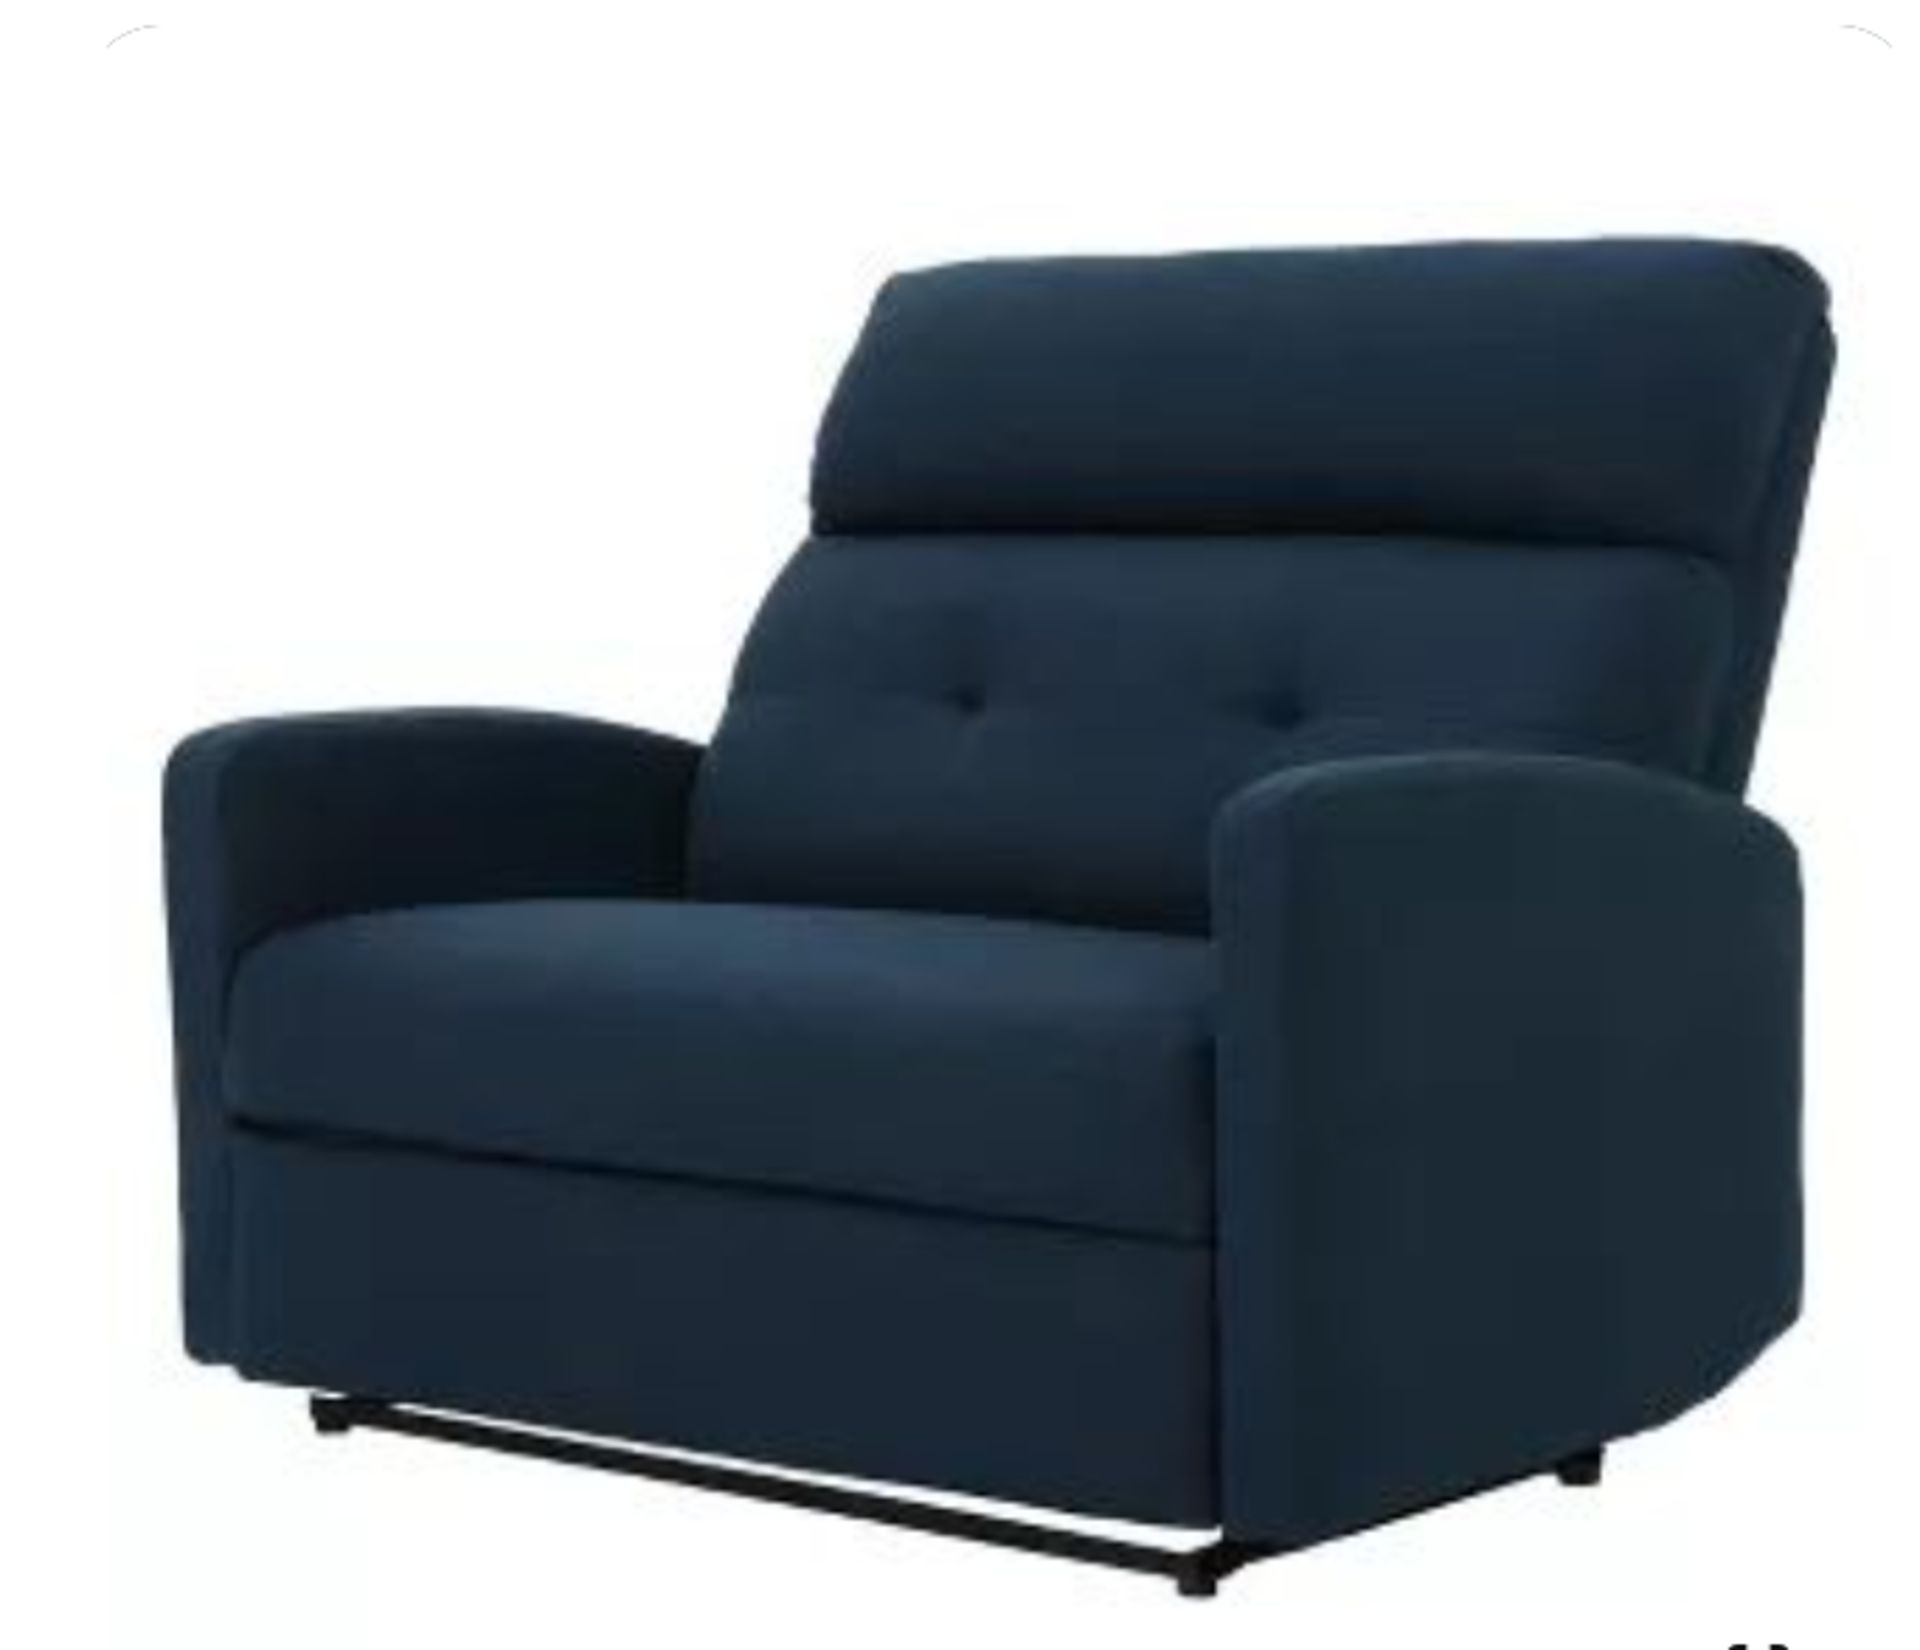 **(BRAND NEW SEALED BOX)** OVERSIZED CHAIR NAVY BLUE